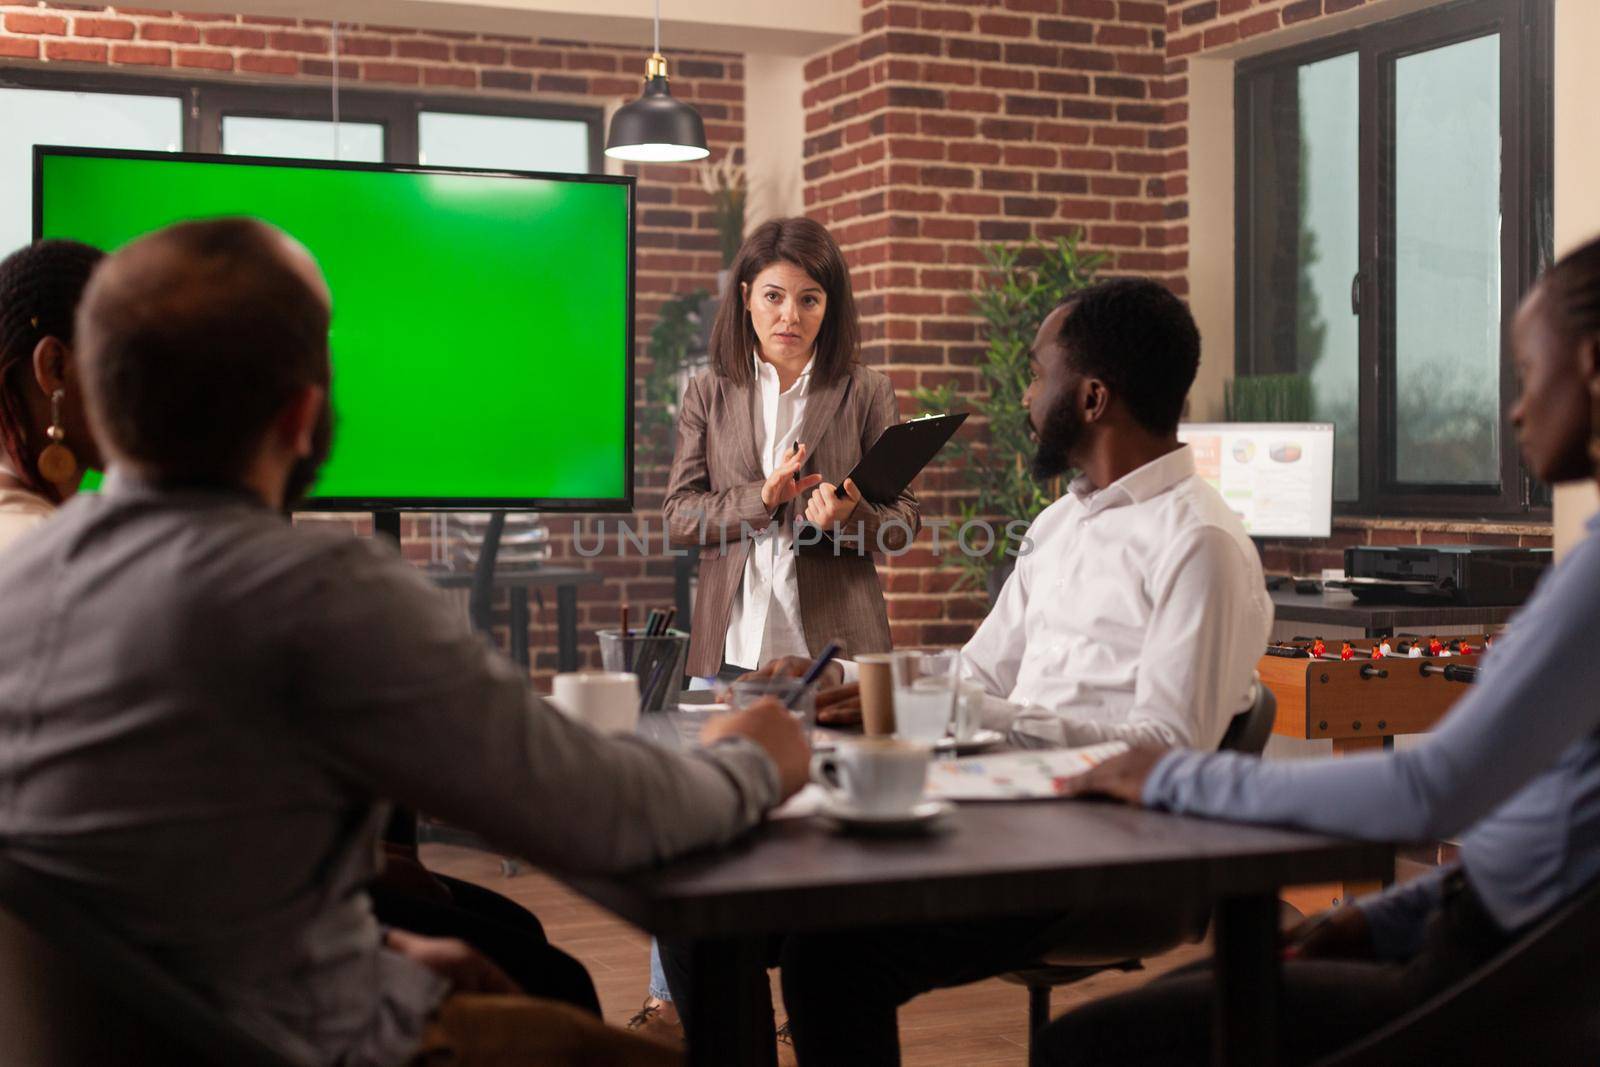 Executive manager woman planning company presentation explaining management strategy to businessteam working in startup office. Mock up green screen chroma key monitor isolated display